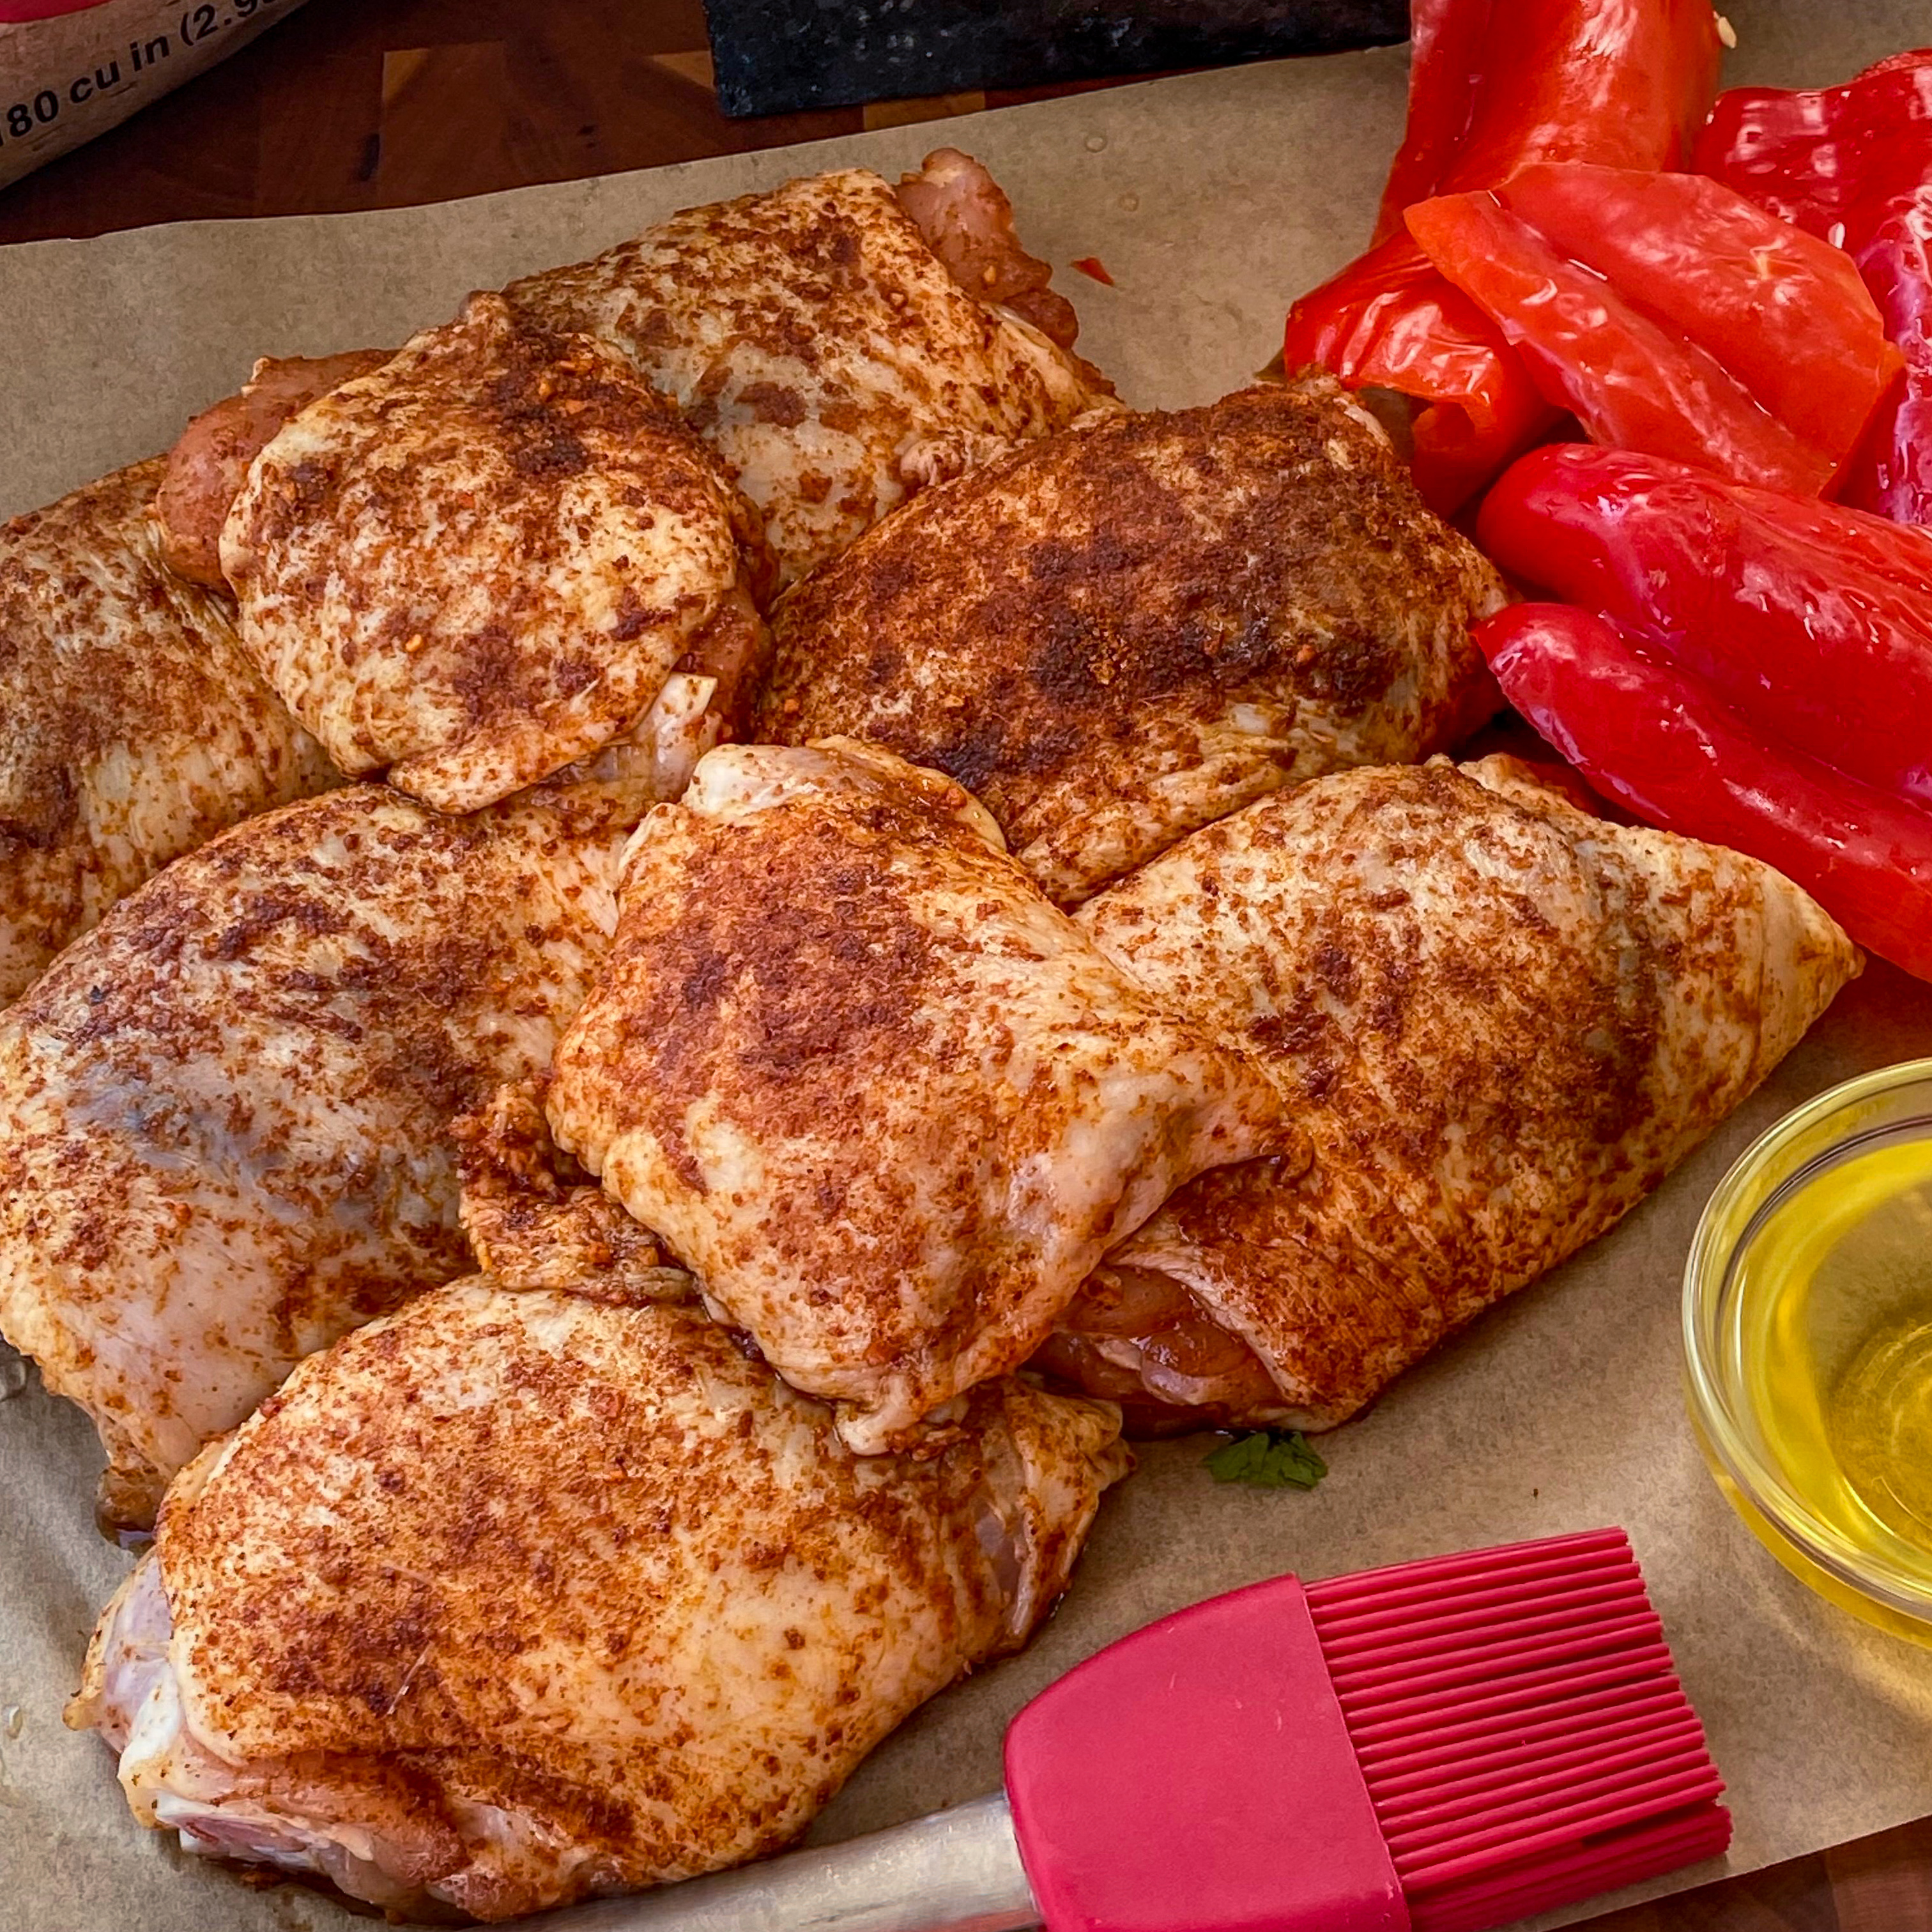 Wrap seasoned chicken skin into a bundle. Chicken is not ready to grill. 